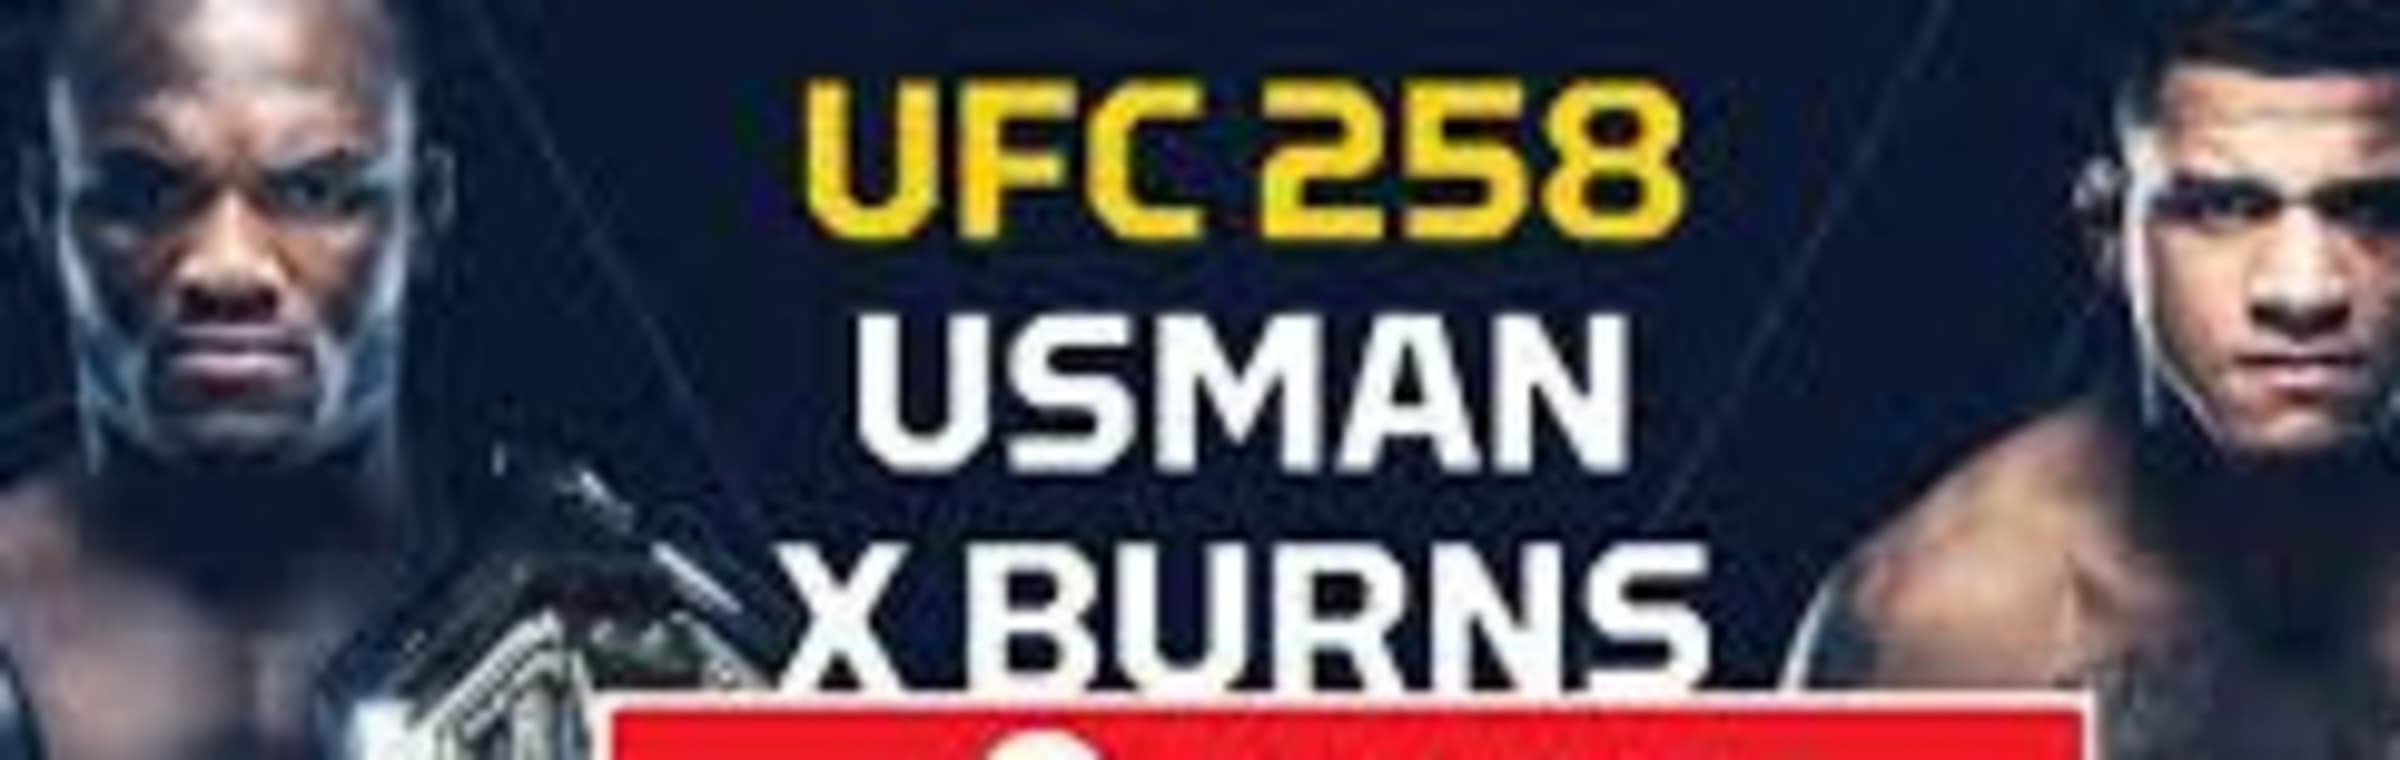 How To Watch Ufc 258 Live Stream Online Ppv Channel By Heyivi9273 Wikifactory